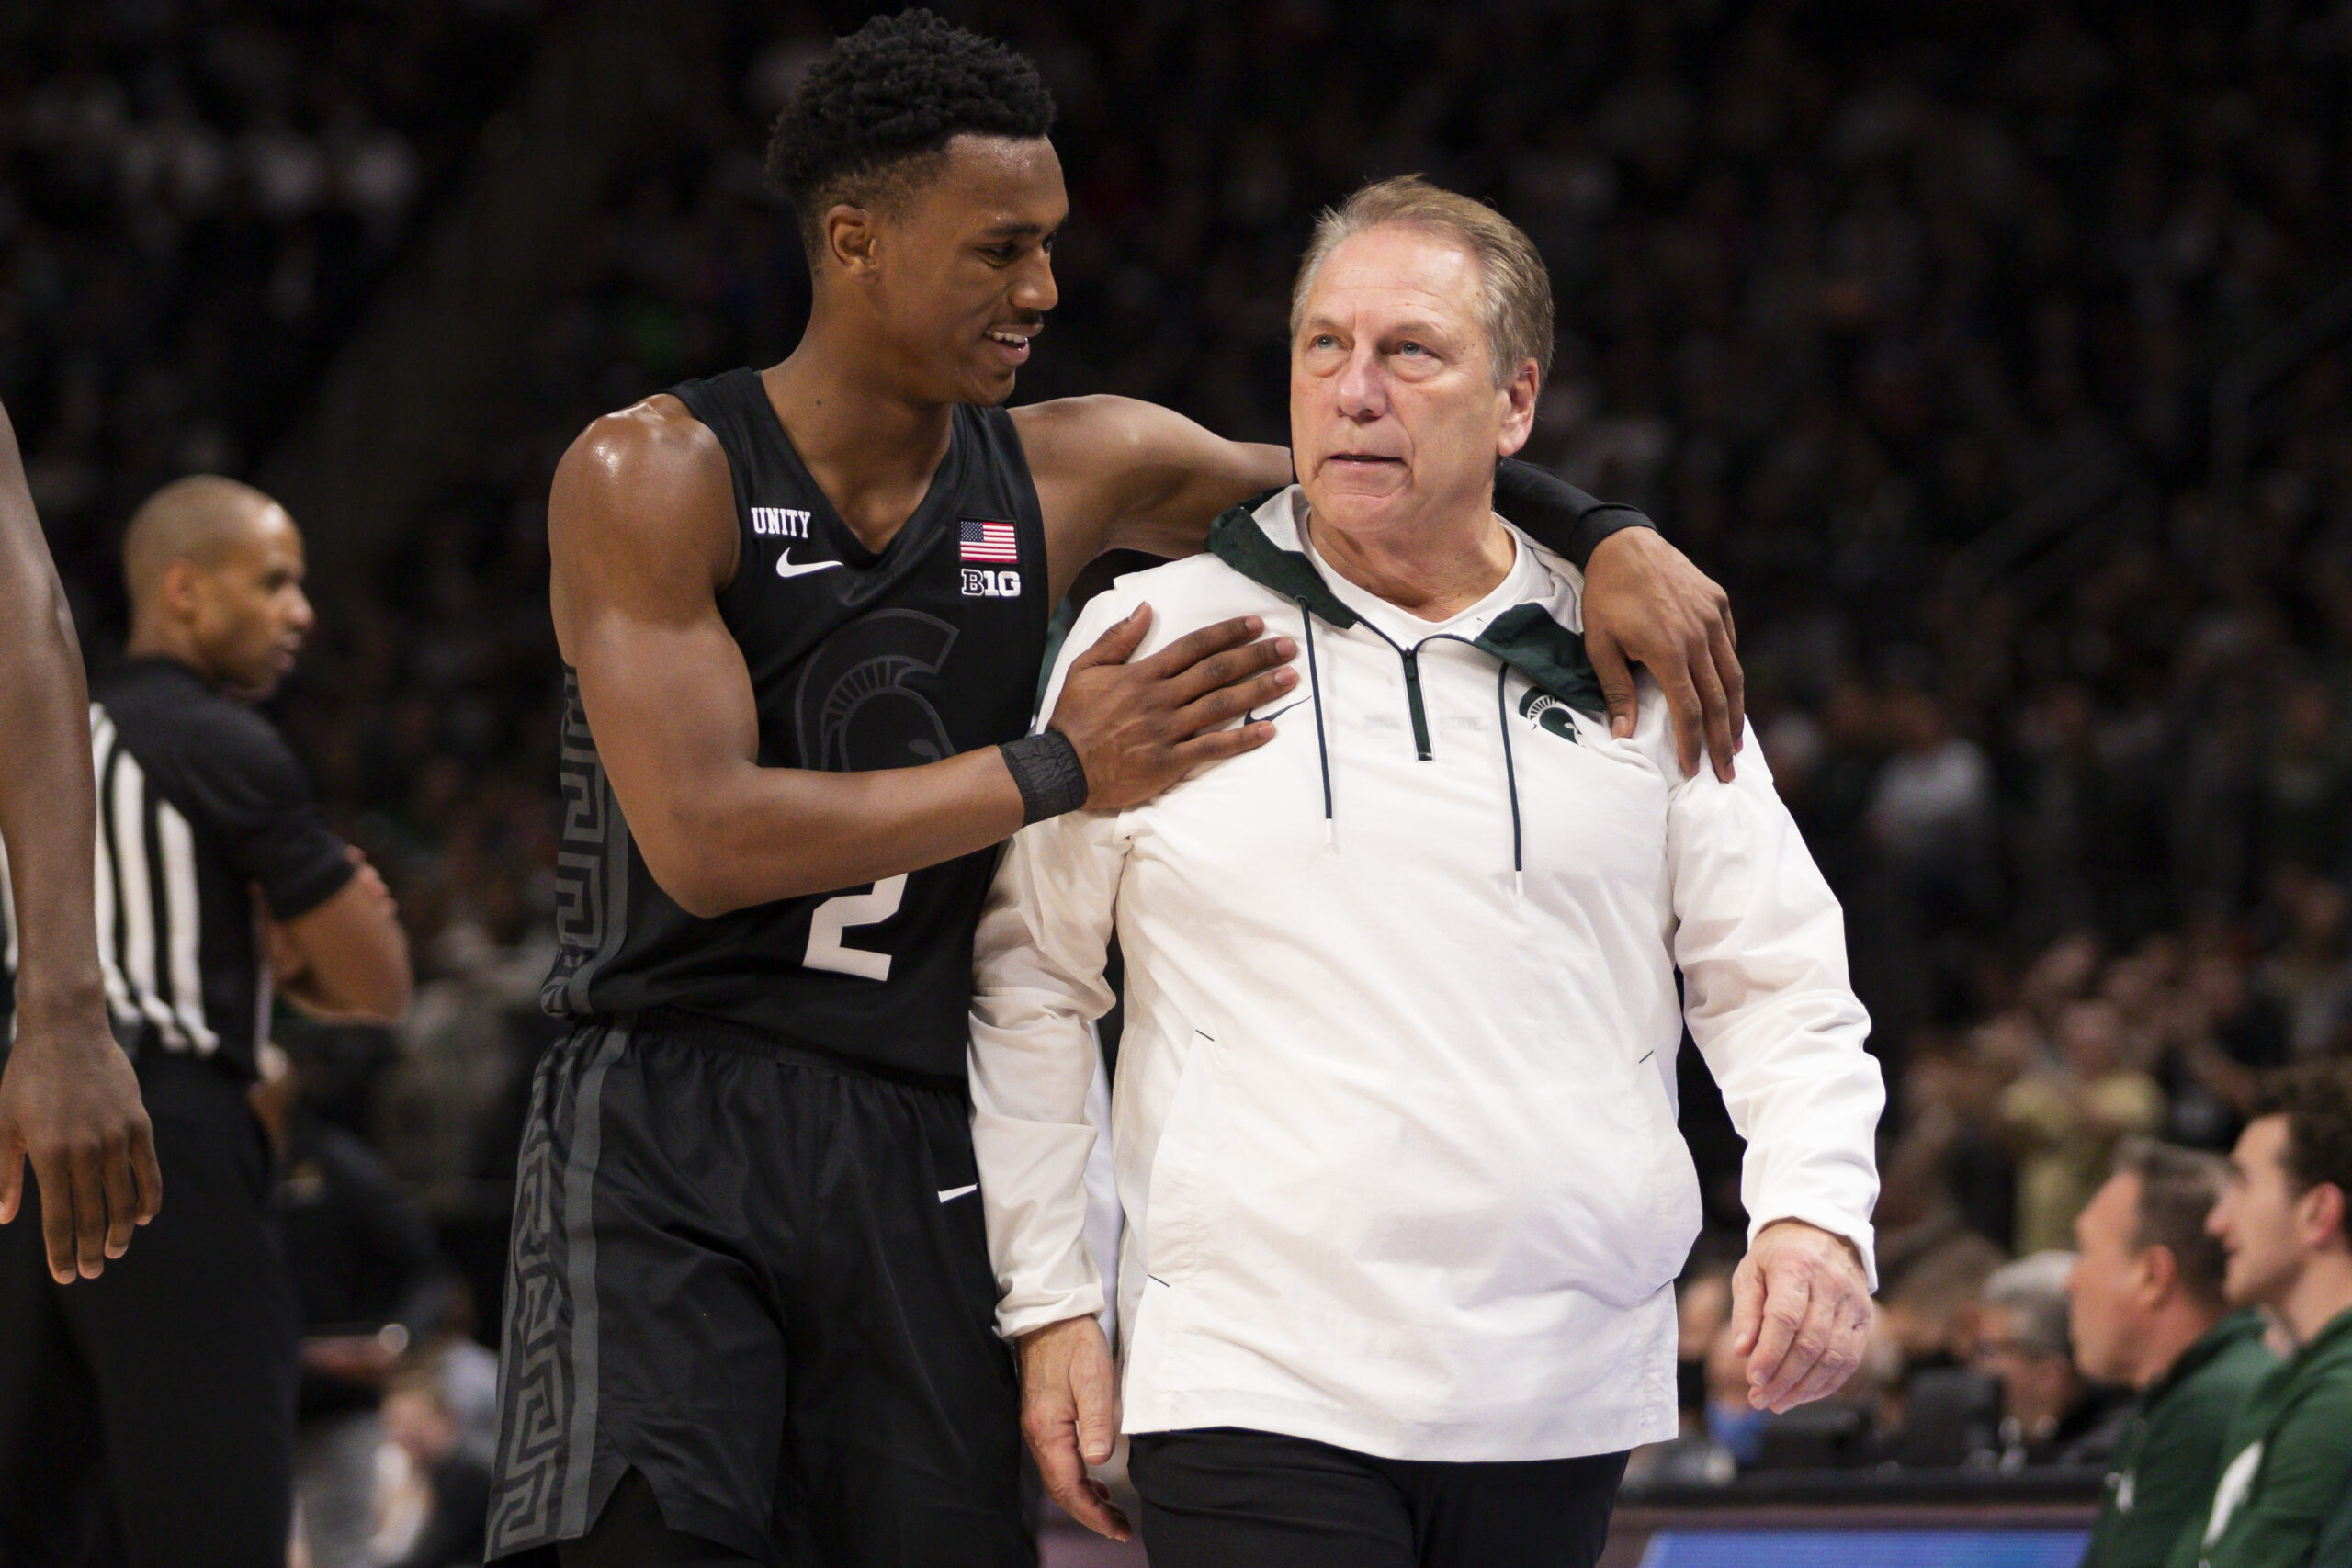 Michigan State basketball player Tyson Walker comfirts his coach Tom Izzo during a game